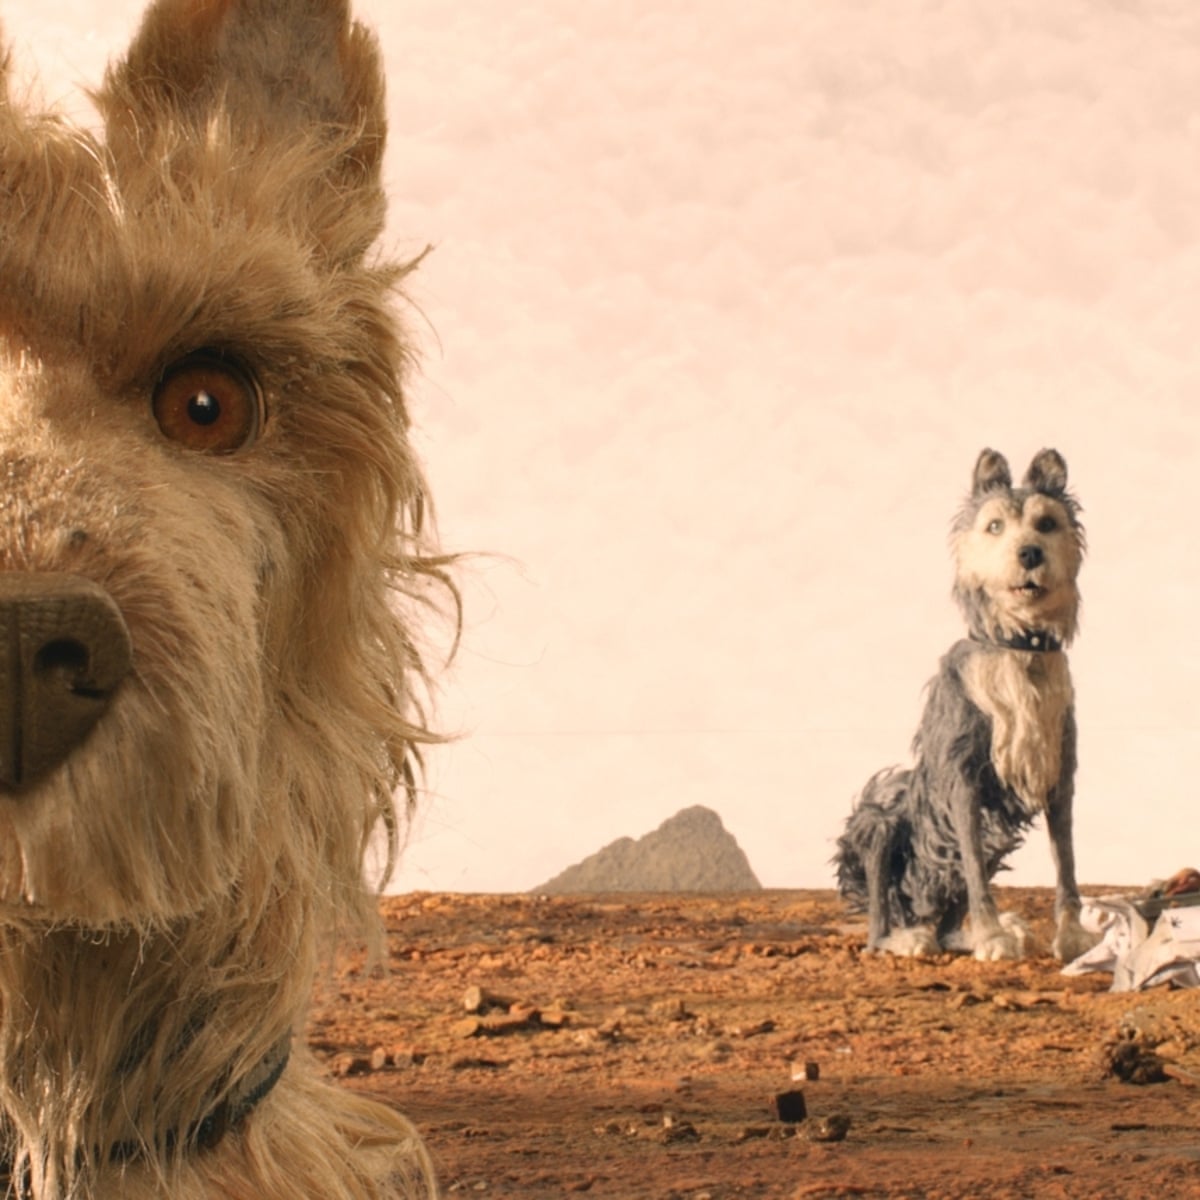 Isle Of Dogs Review Wes Anderson S Scintillating Stop Motion Has Bite Berlin Film Festival 2018 The Guardian